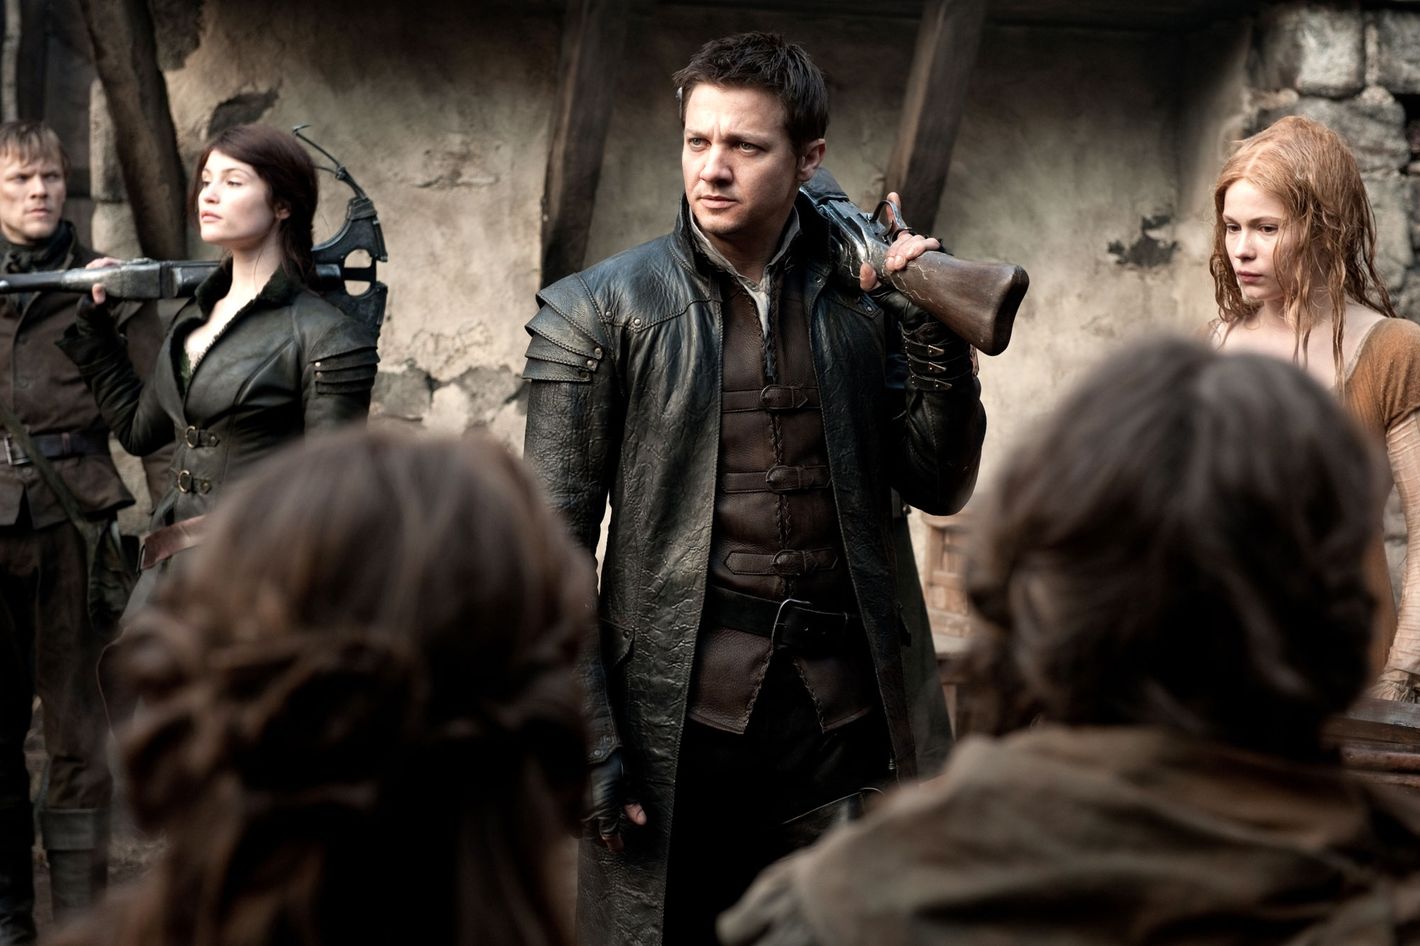 Review: HANSEL & GRETEL: WITCH HUNTERS